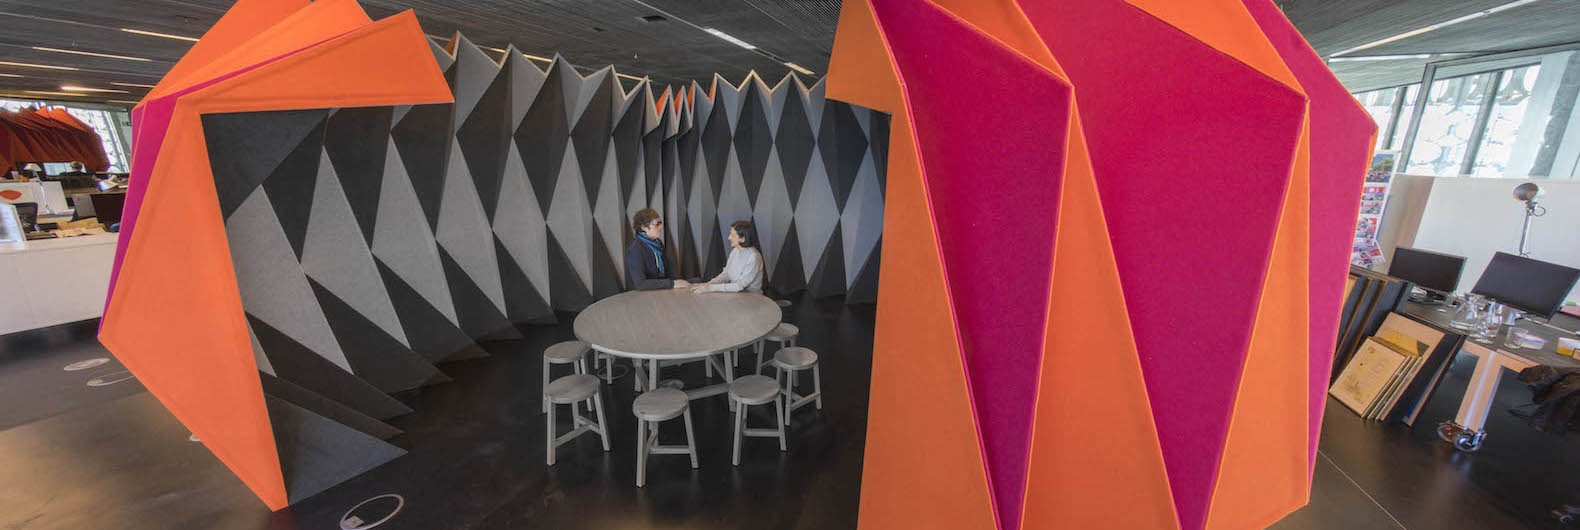 Origami Pleat Fold Sound Absorbing Materials Fold Into A Giant Origami Like Meeting Pod